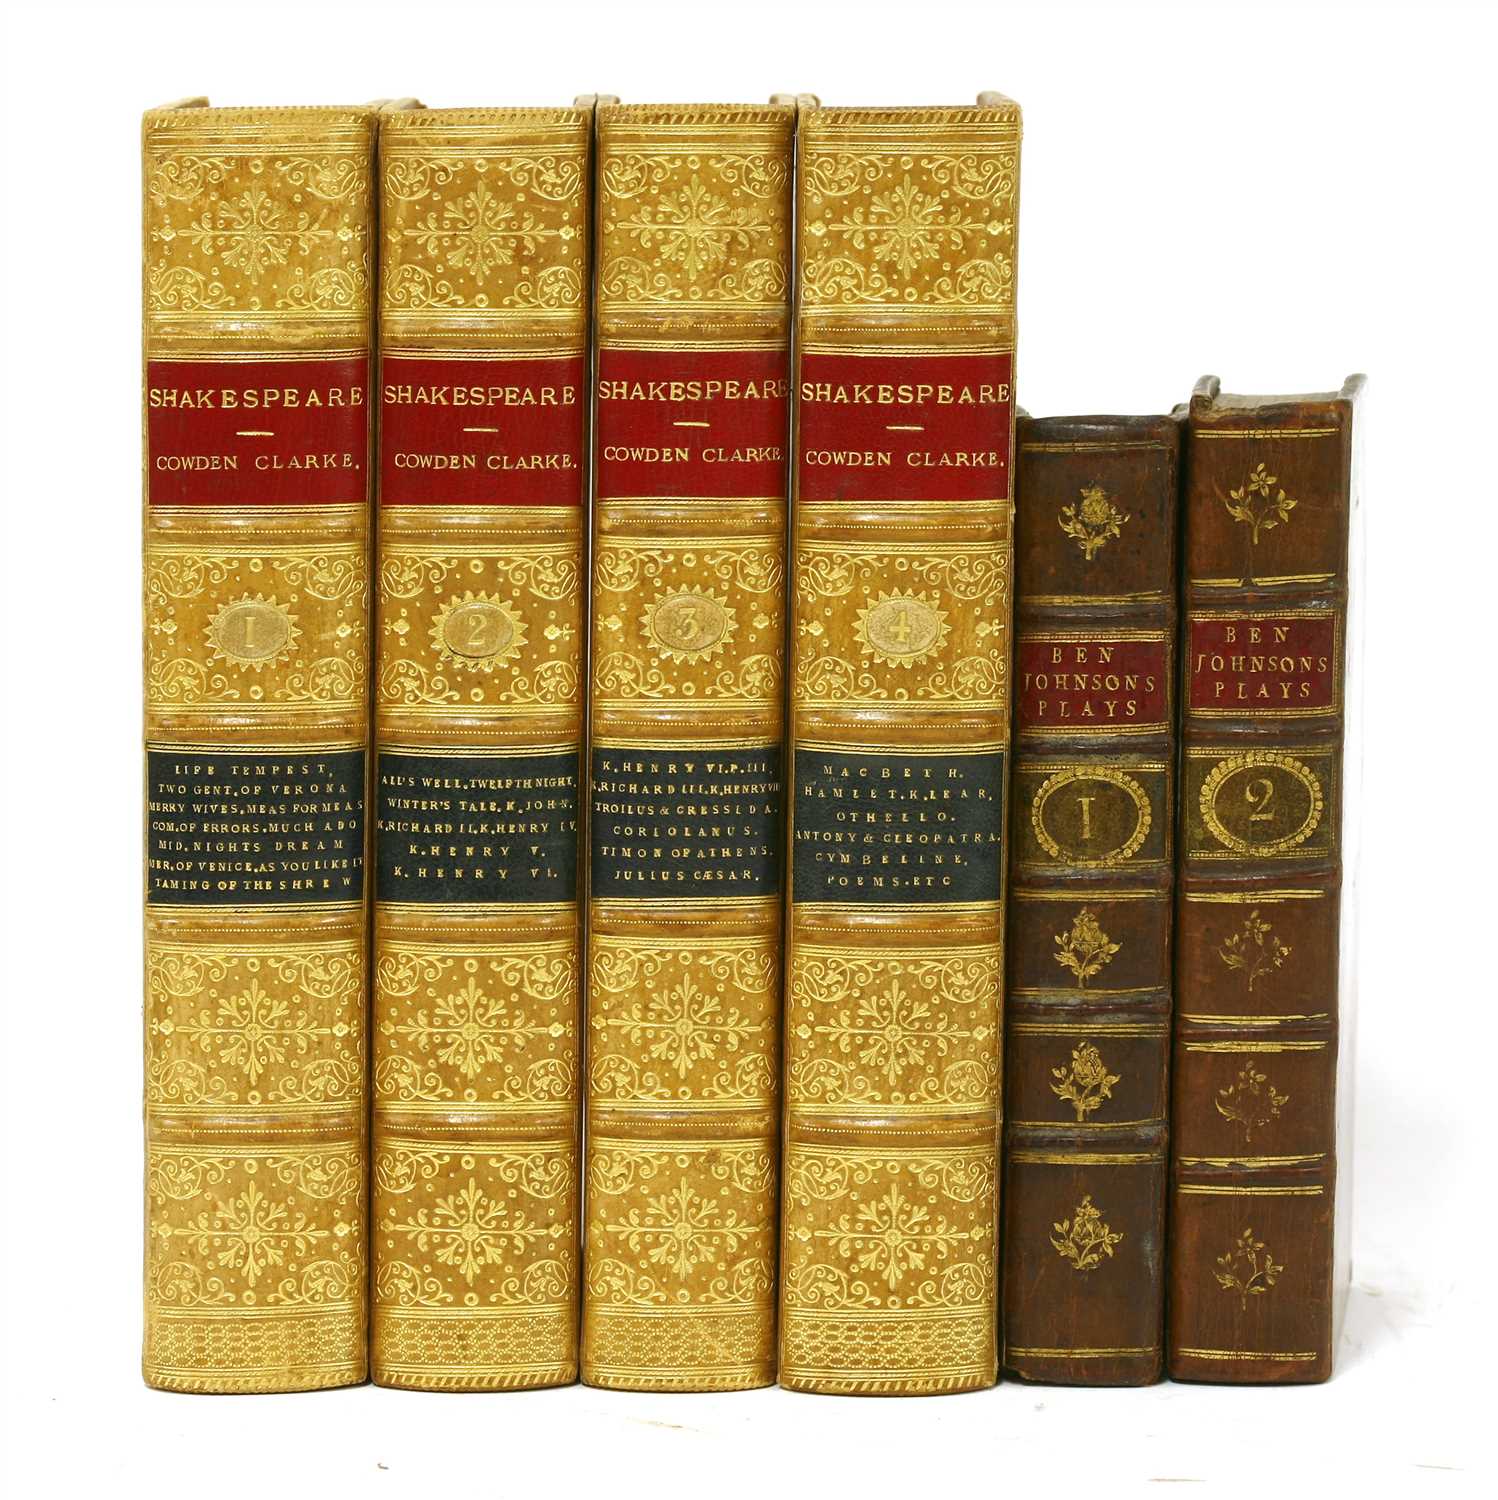 Lot 79 - 1- Ben Johnson's Plays in Two Vols.